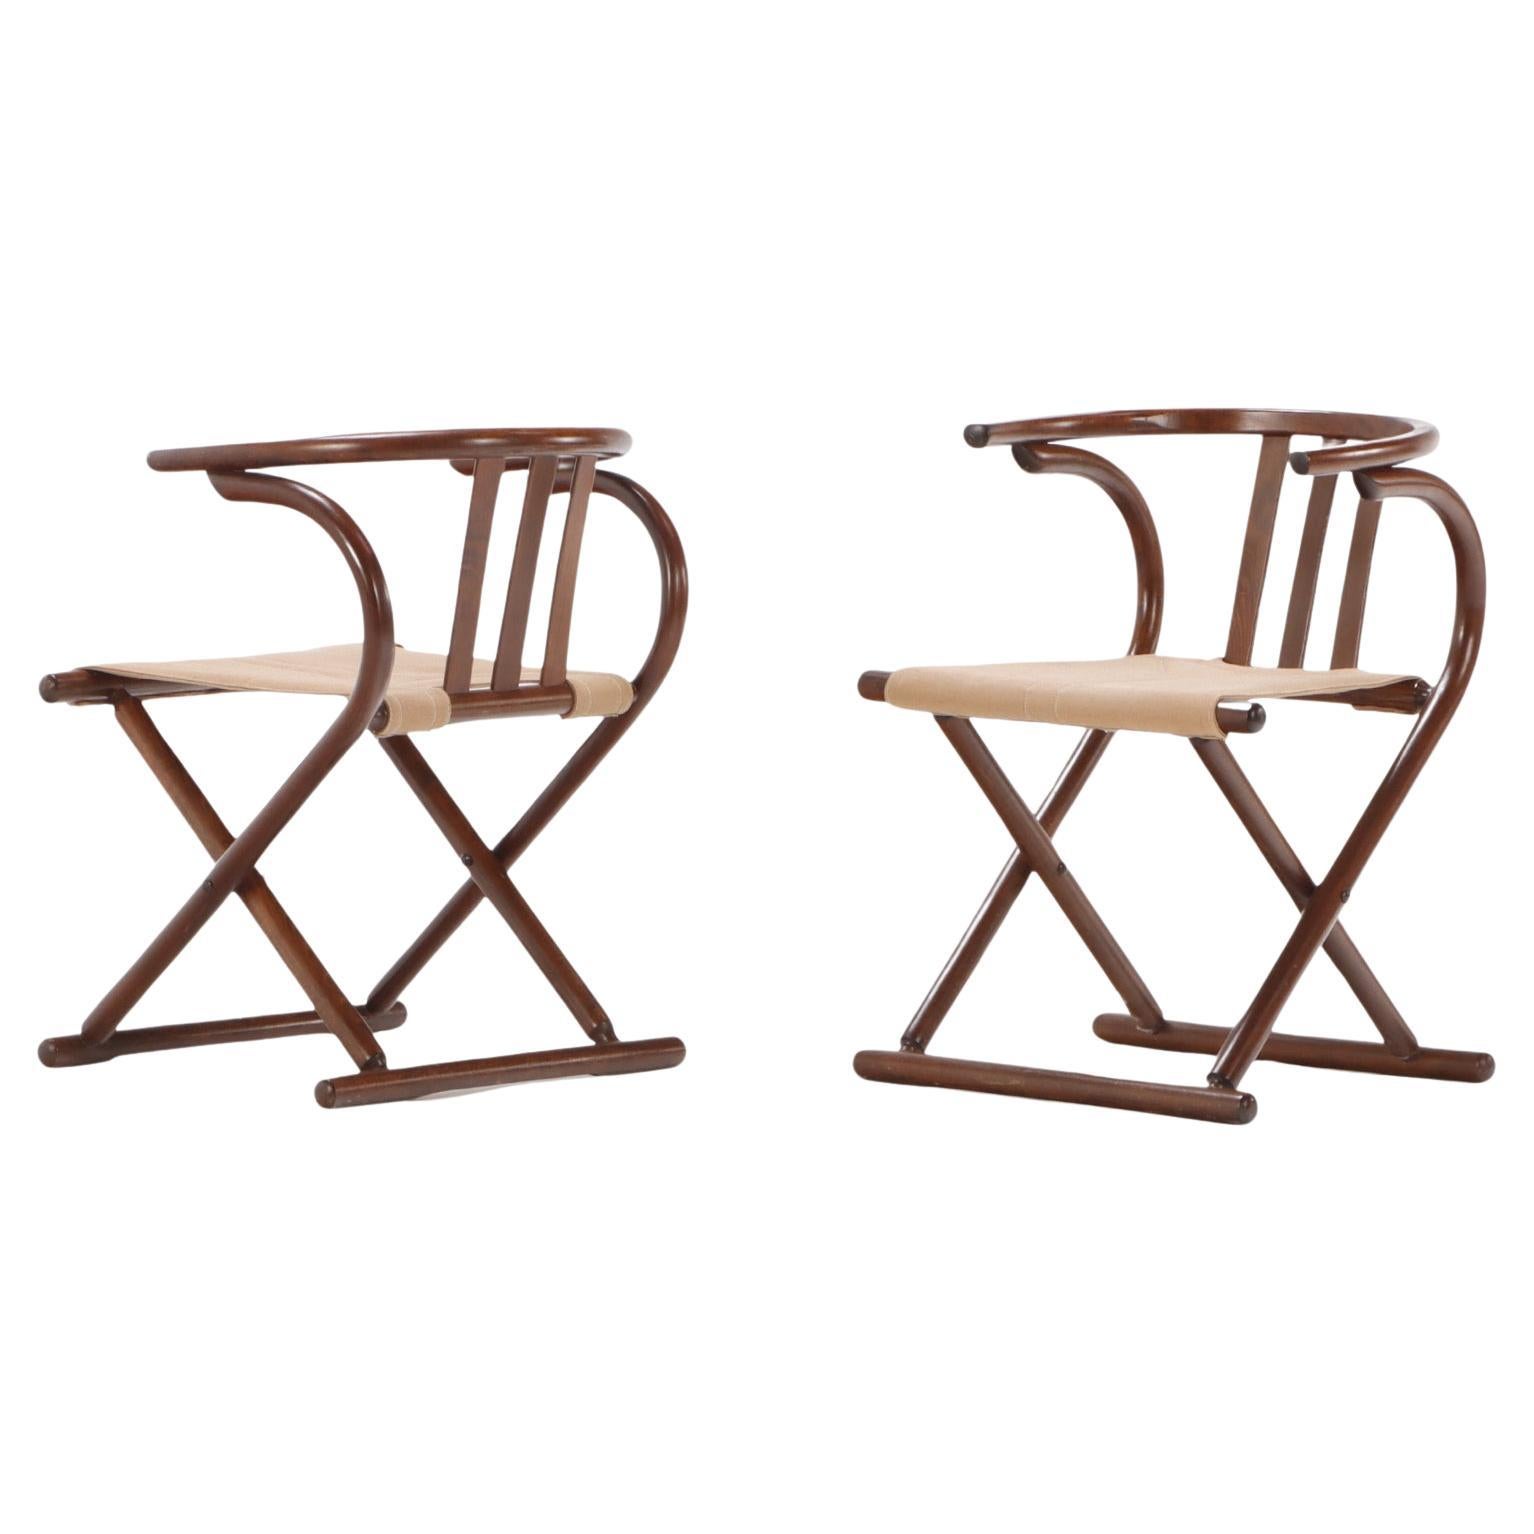 A pair of Thonet style folding sling chairs having downswept arms